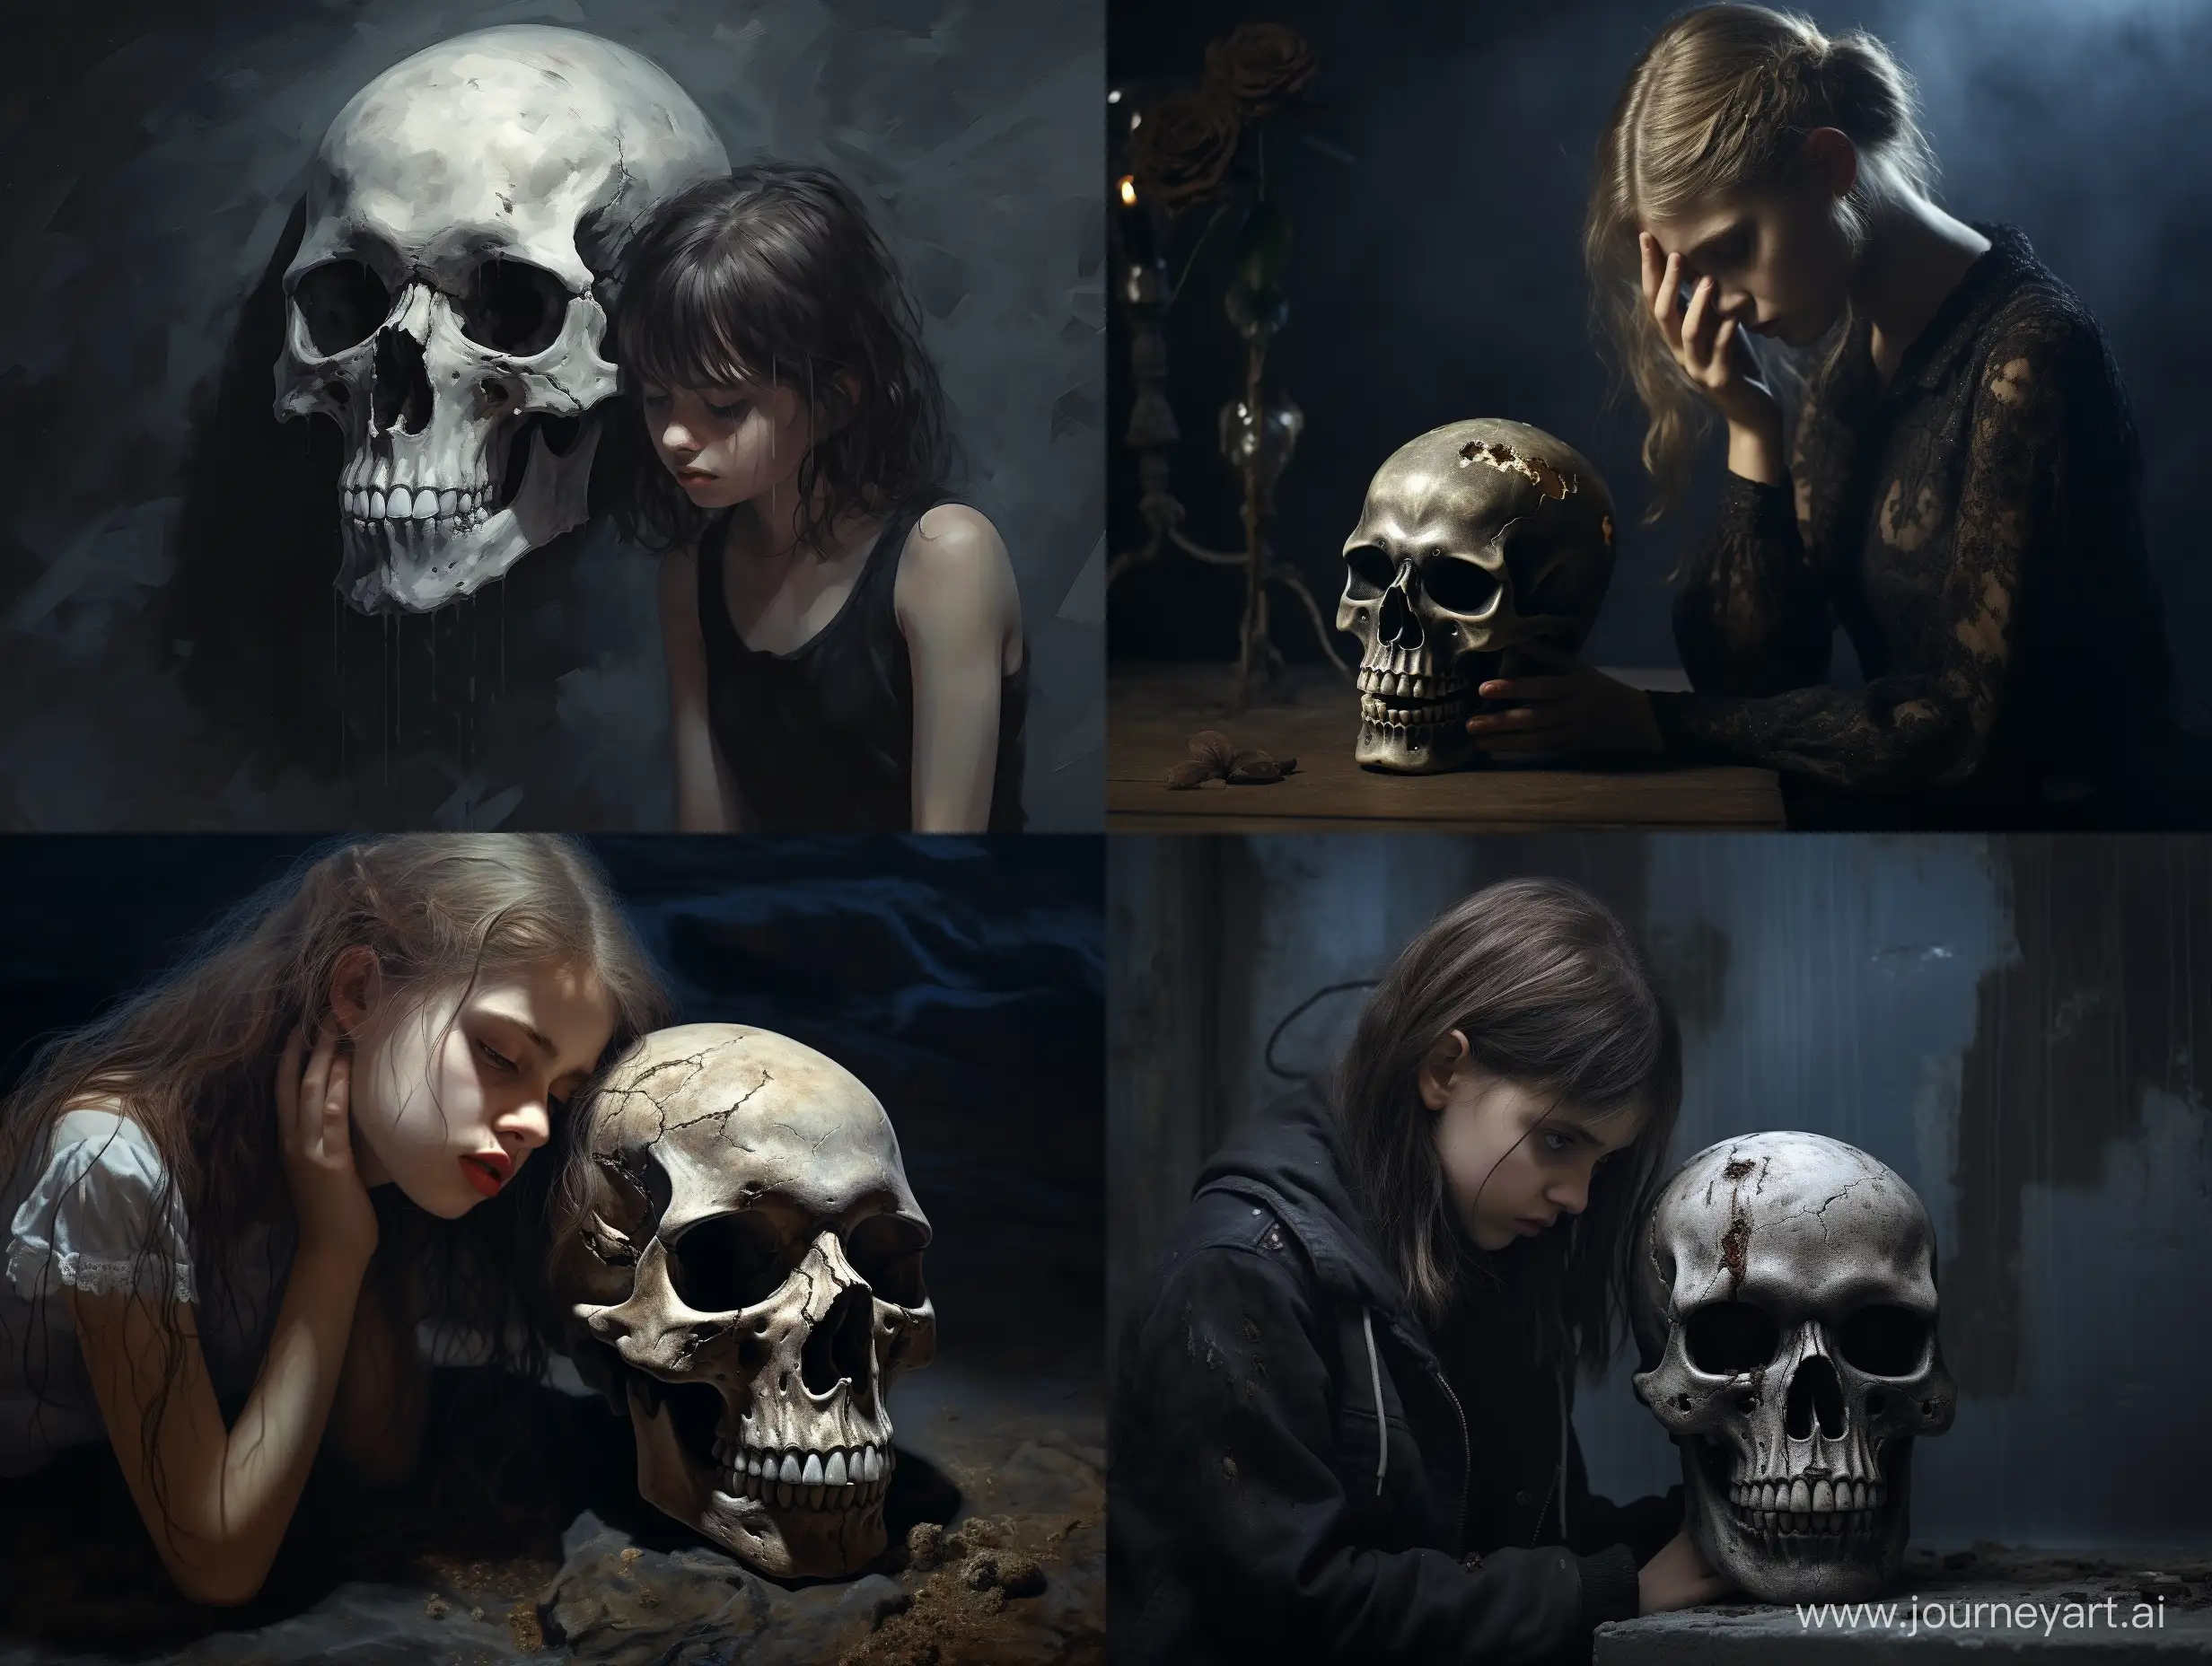 Distressed-Girl-with-Skull-in-Emotional-Artistic-Composition